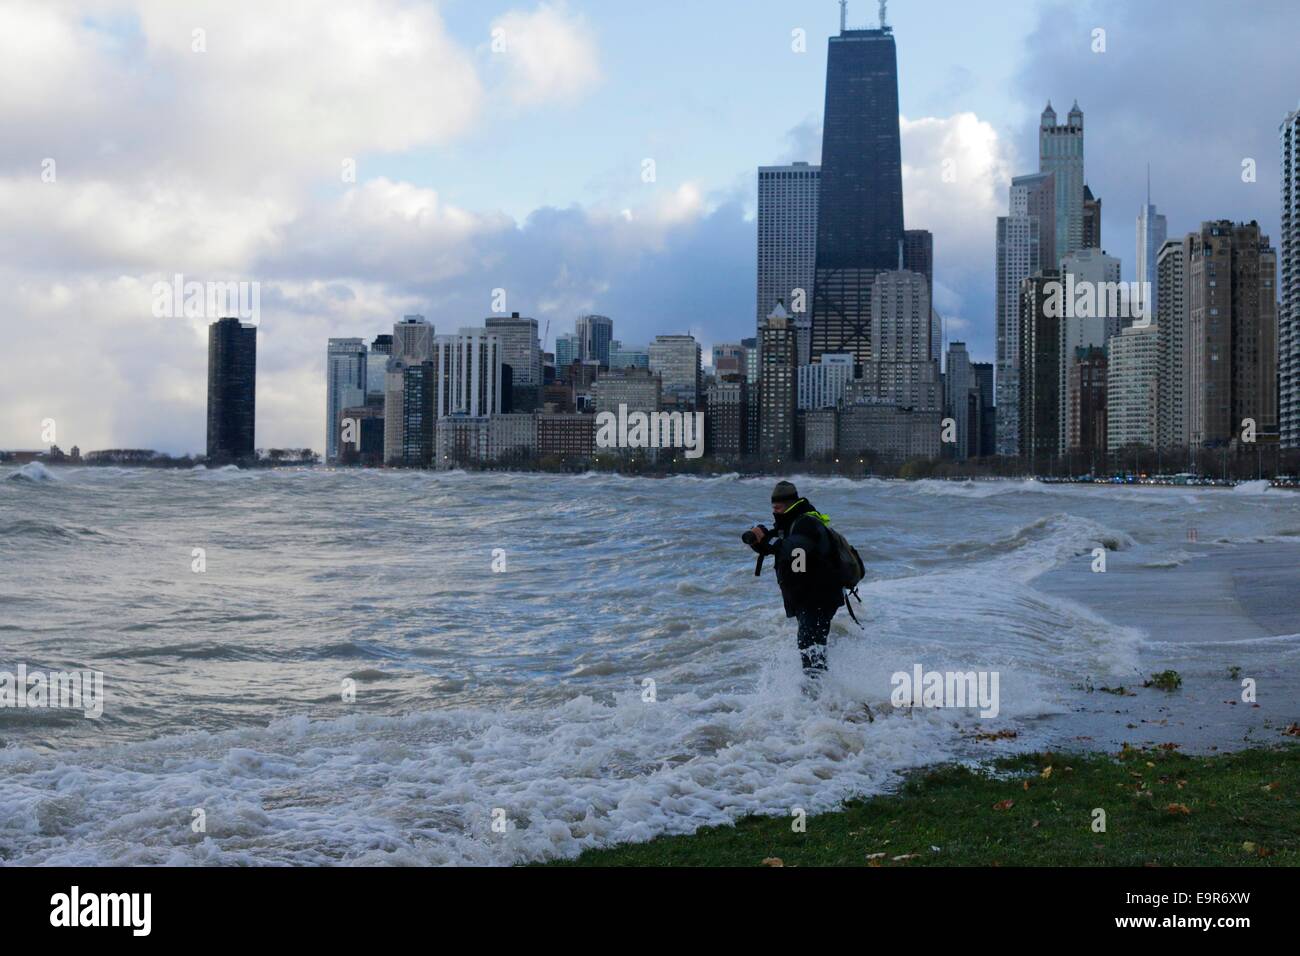 Chicago, Illinois, USA. 31st October, 2014.  A large Lake Michigan wave soaks a photographer who got a bit too close to the action during today's gale. The man beat a hasty retreat out of the danger zone. Gale force winds produced waves of over 20 feet as measured at a NOAA weather buoy far out on the big lake. Credit:  Todd Bannor/Alamy Live News Stock Photo